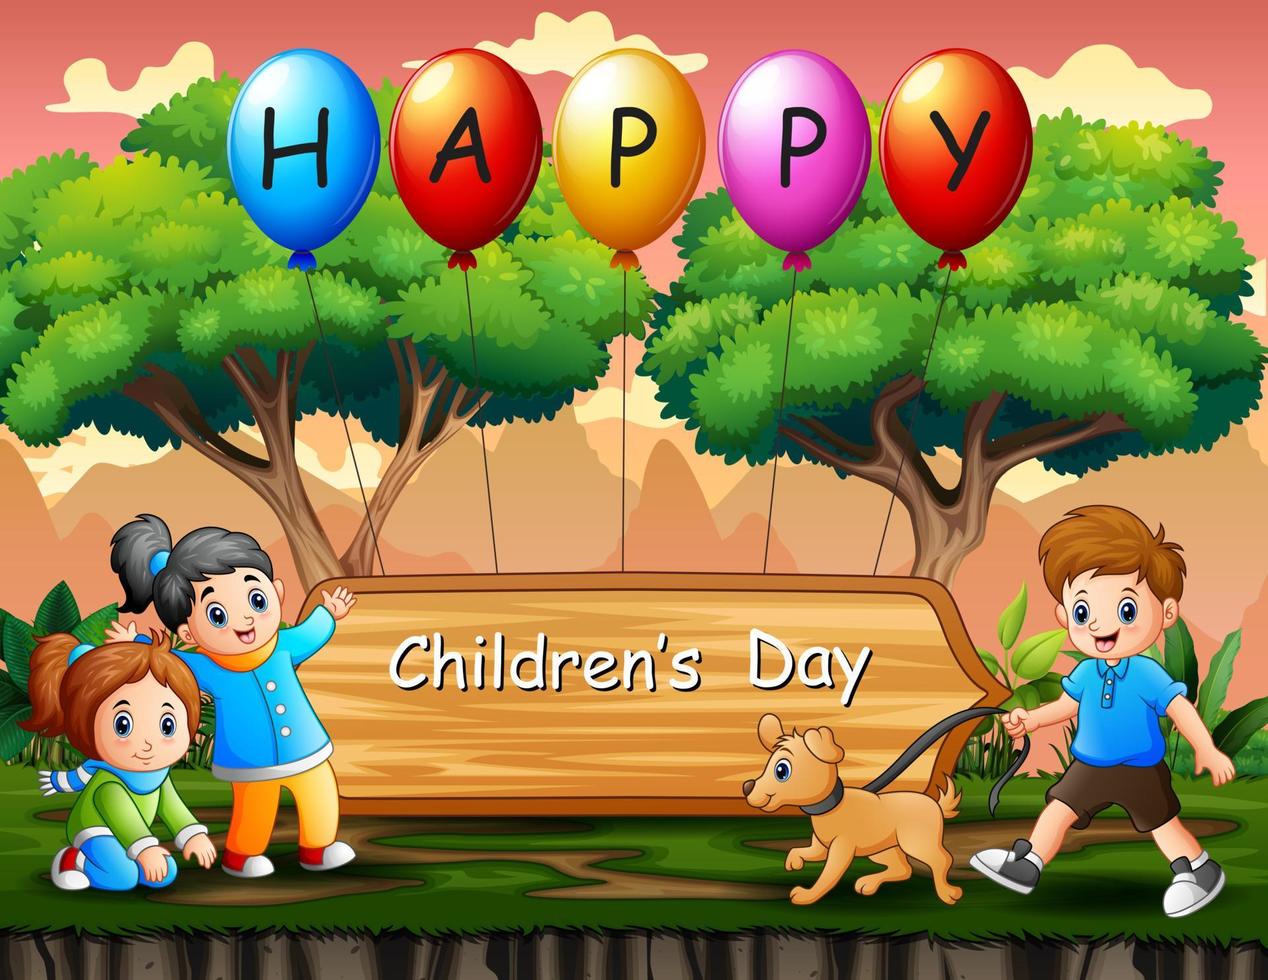 Happy children's day poster with kids playing in the park vector